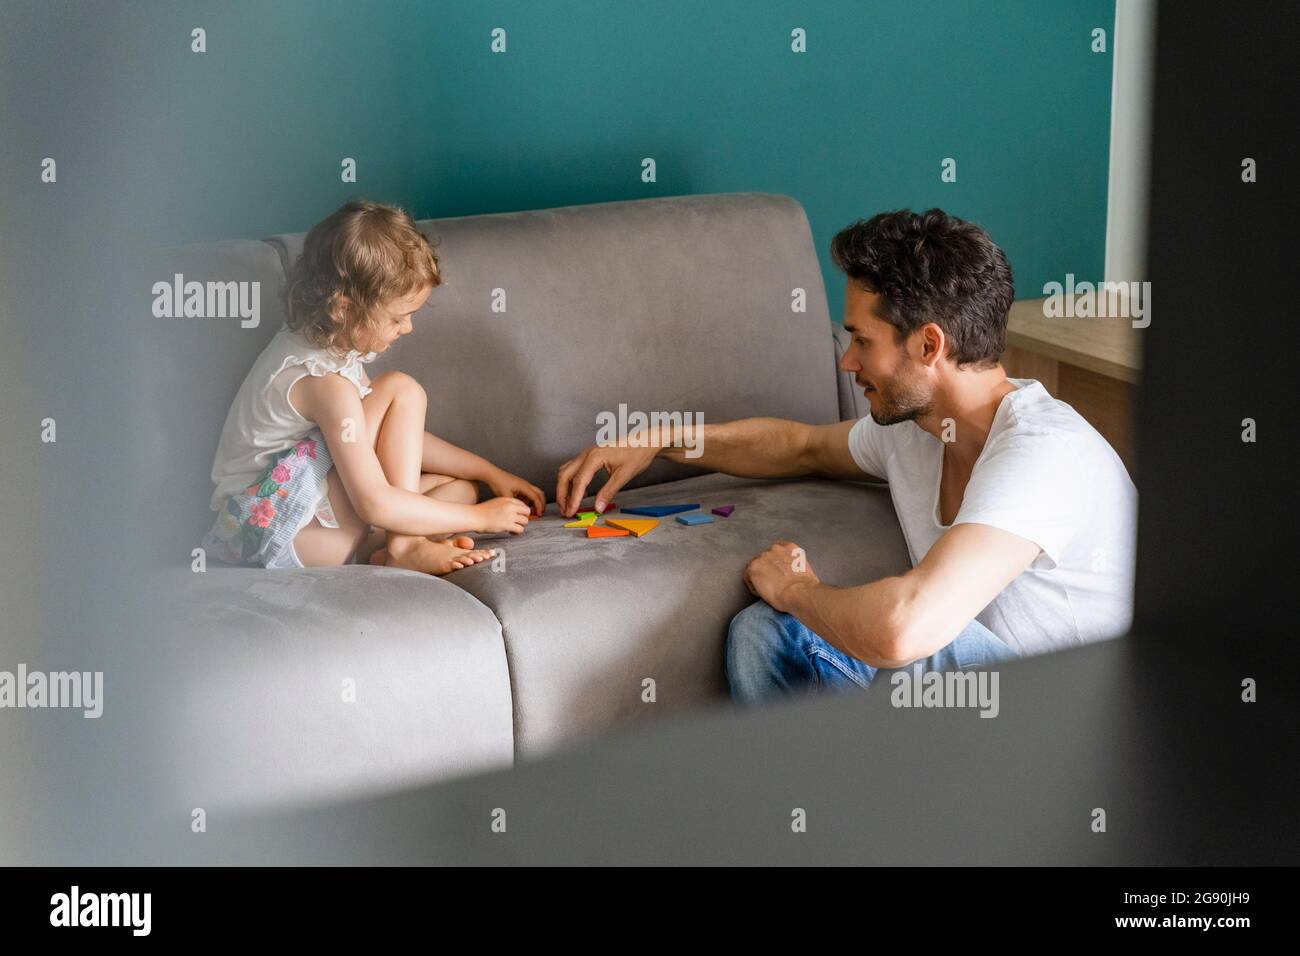 Father helping daughter while playing with puzzle on sofa Stock Photo